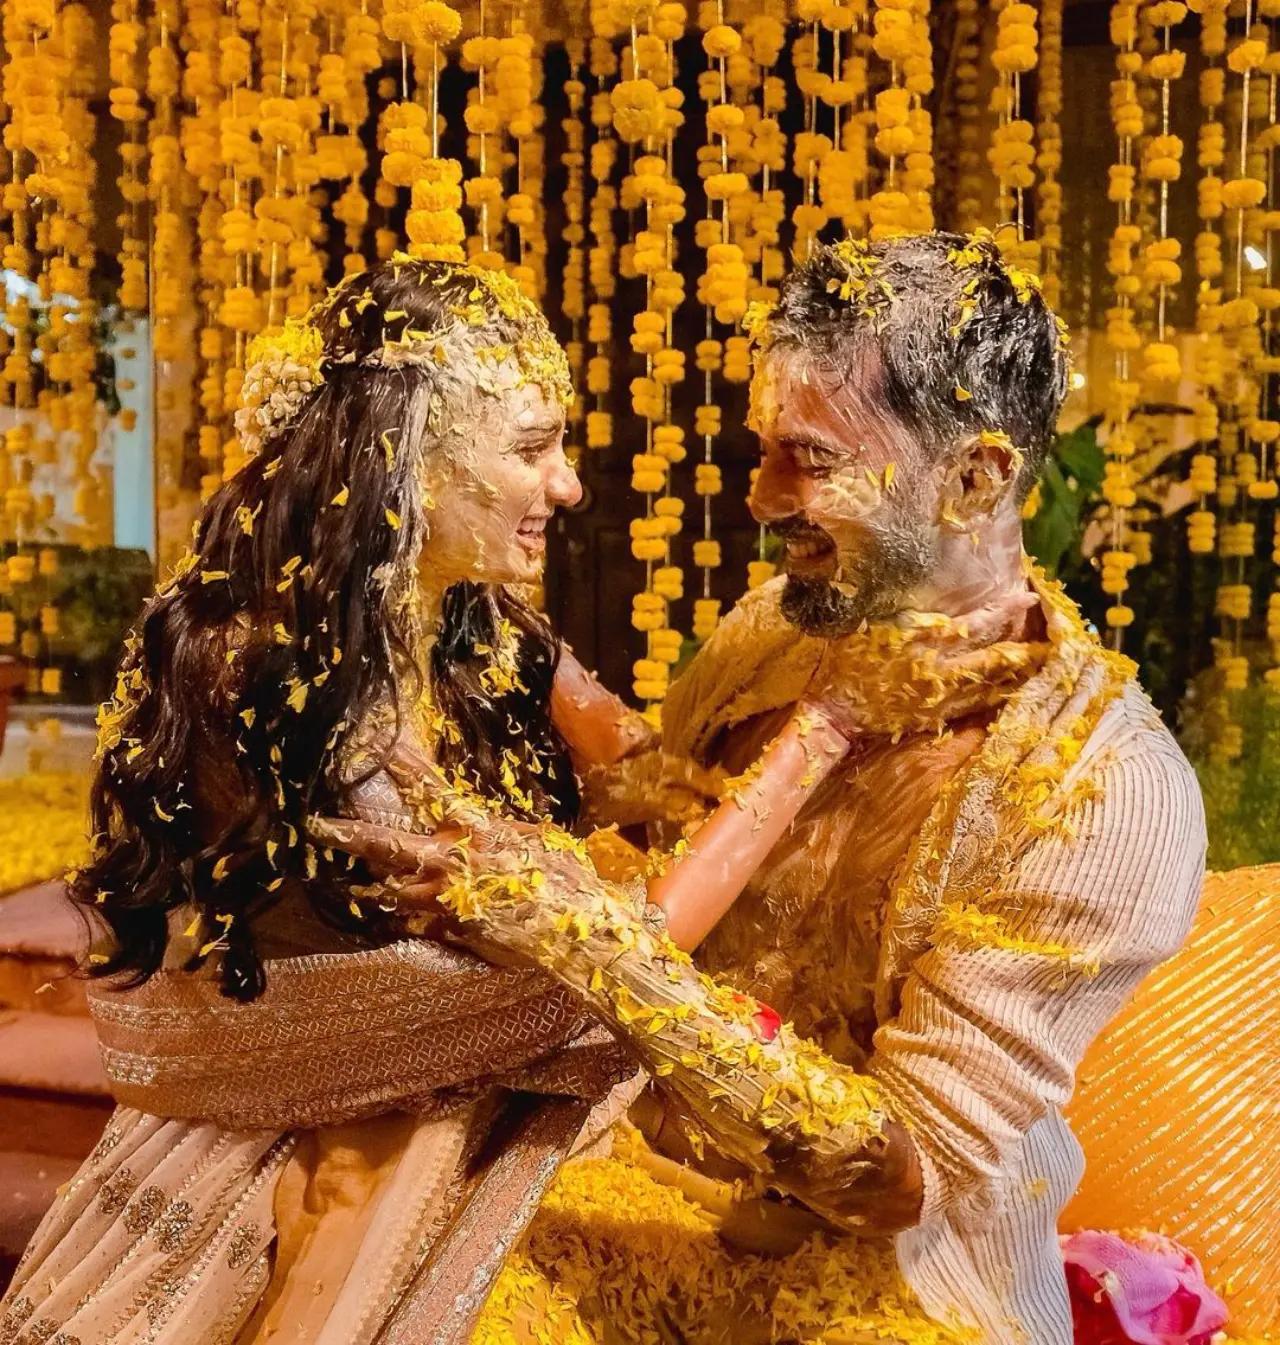 The couple shared cute moments at their haldi ceremony as they applied haldi on each other